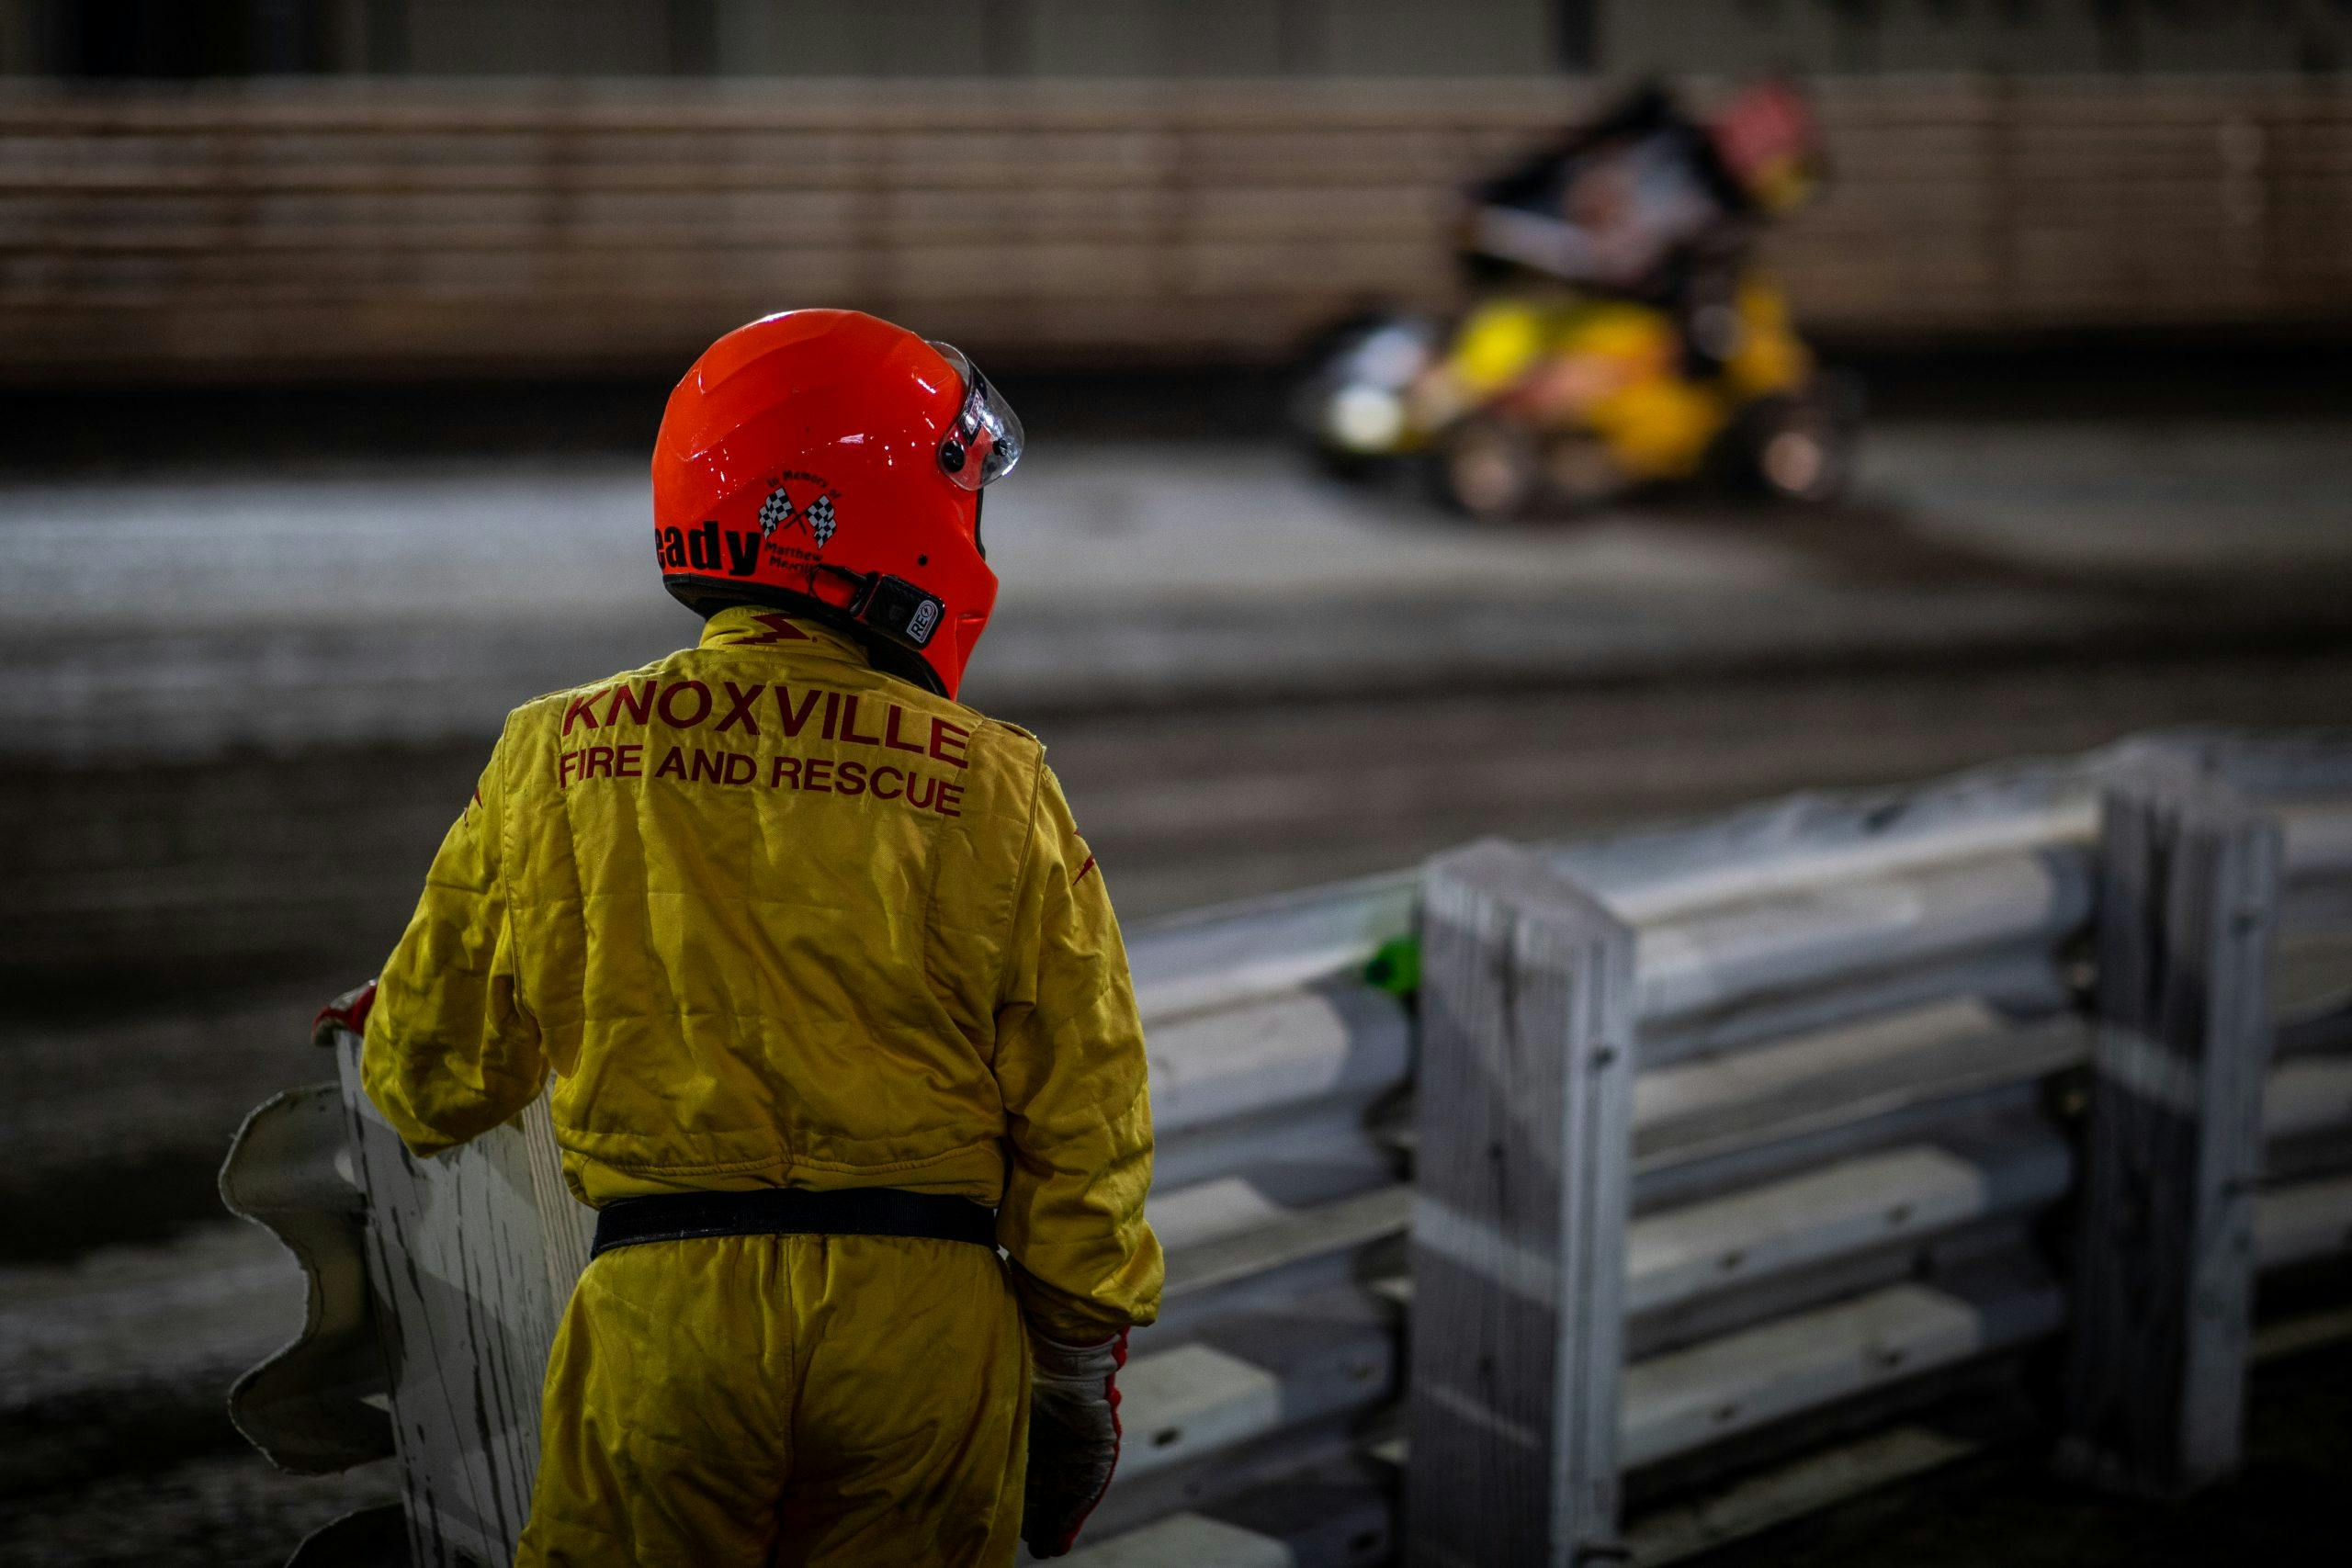 Knoxville Raceway dirt track racing fire and rescue